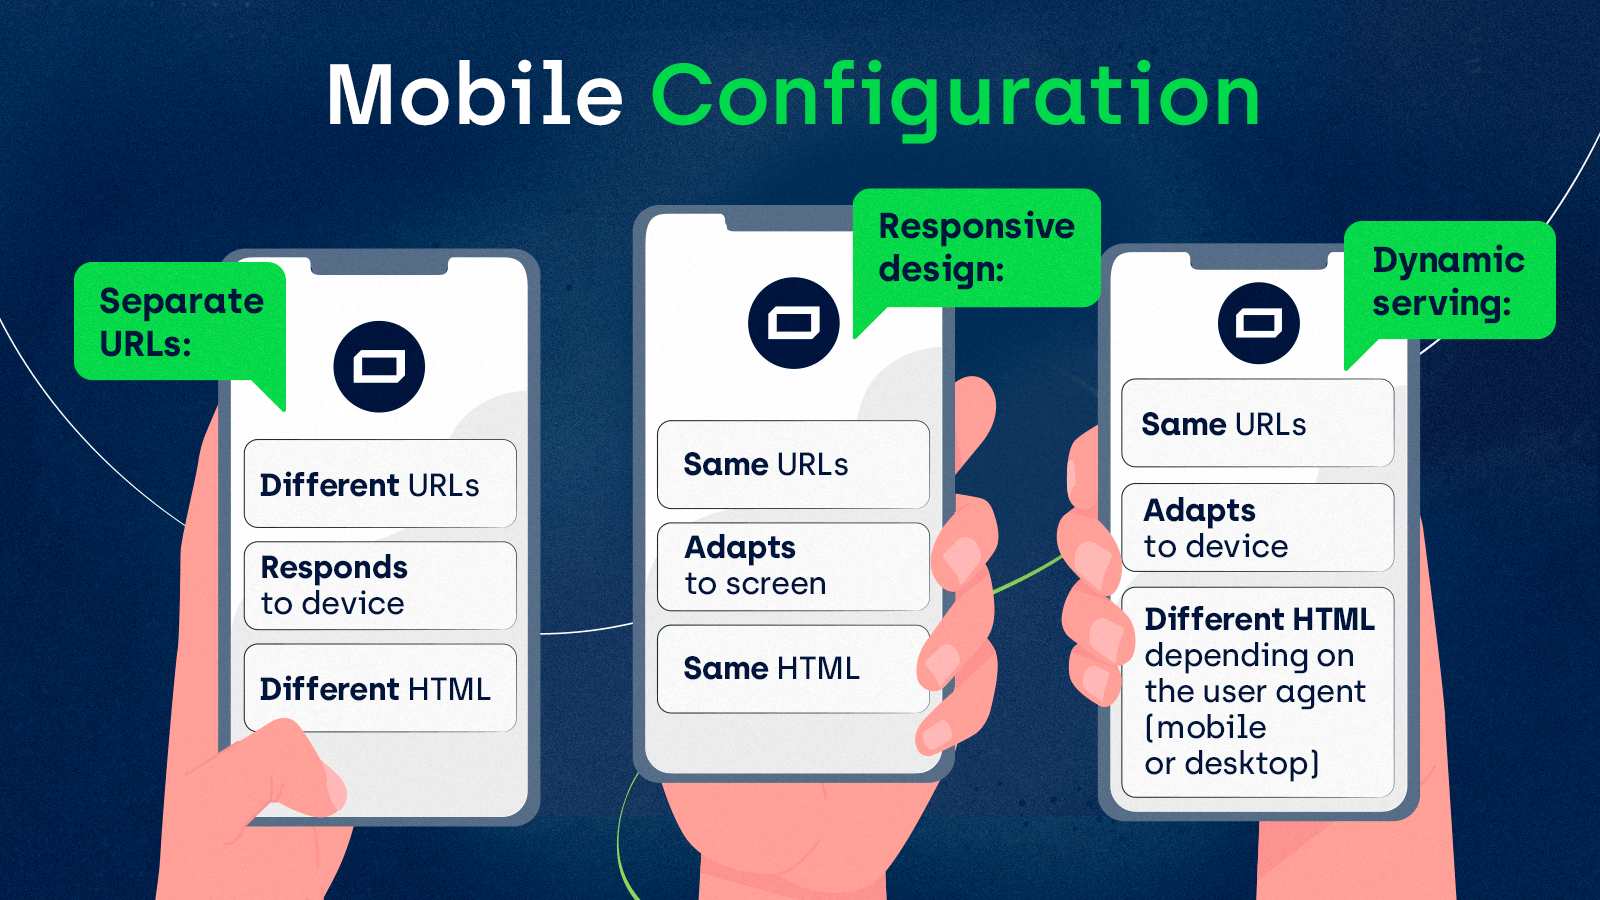 The differences between the possible mobile configurations: Responsive Web Design, Dynamic Serving, and Separate URLs